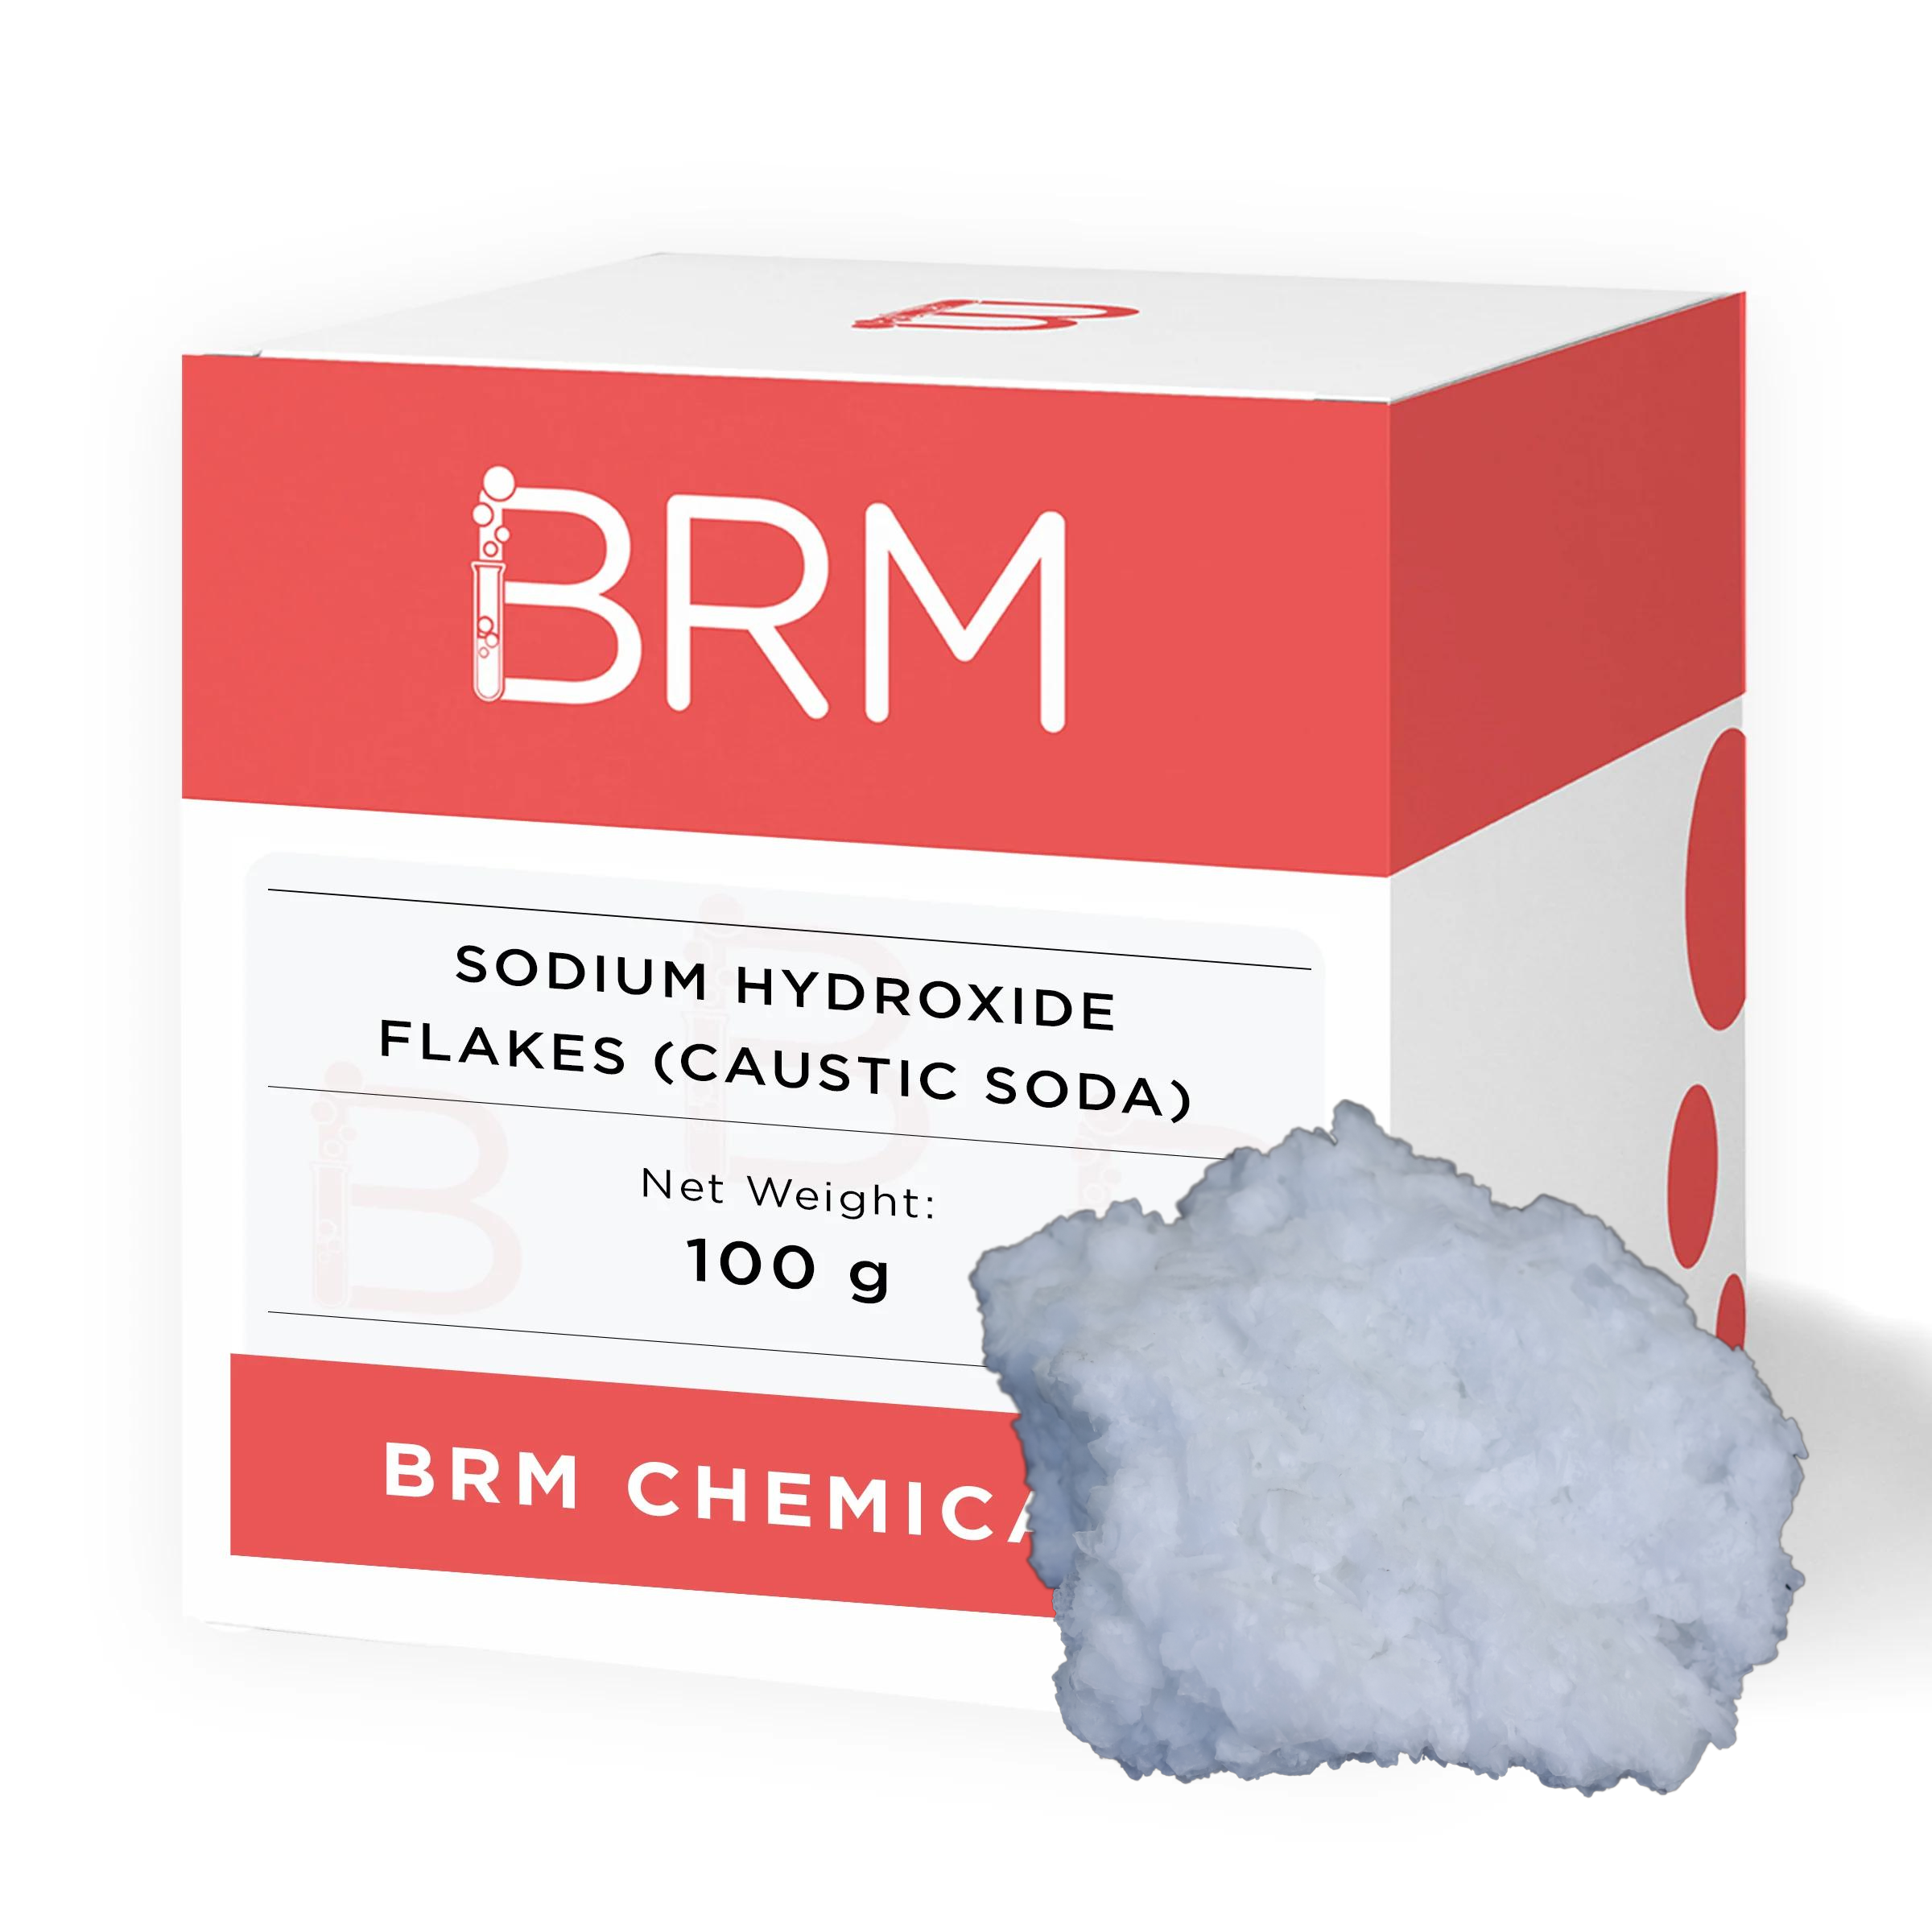 brm-chemicals-sodium-hydroxide-flakes-caustic-soda-for-soap-making-shampoo-cosmetics-moisturizer-lotion-making-domestic-use-diy-personal-care-for-face-hair-skin-body